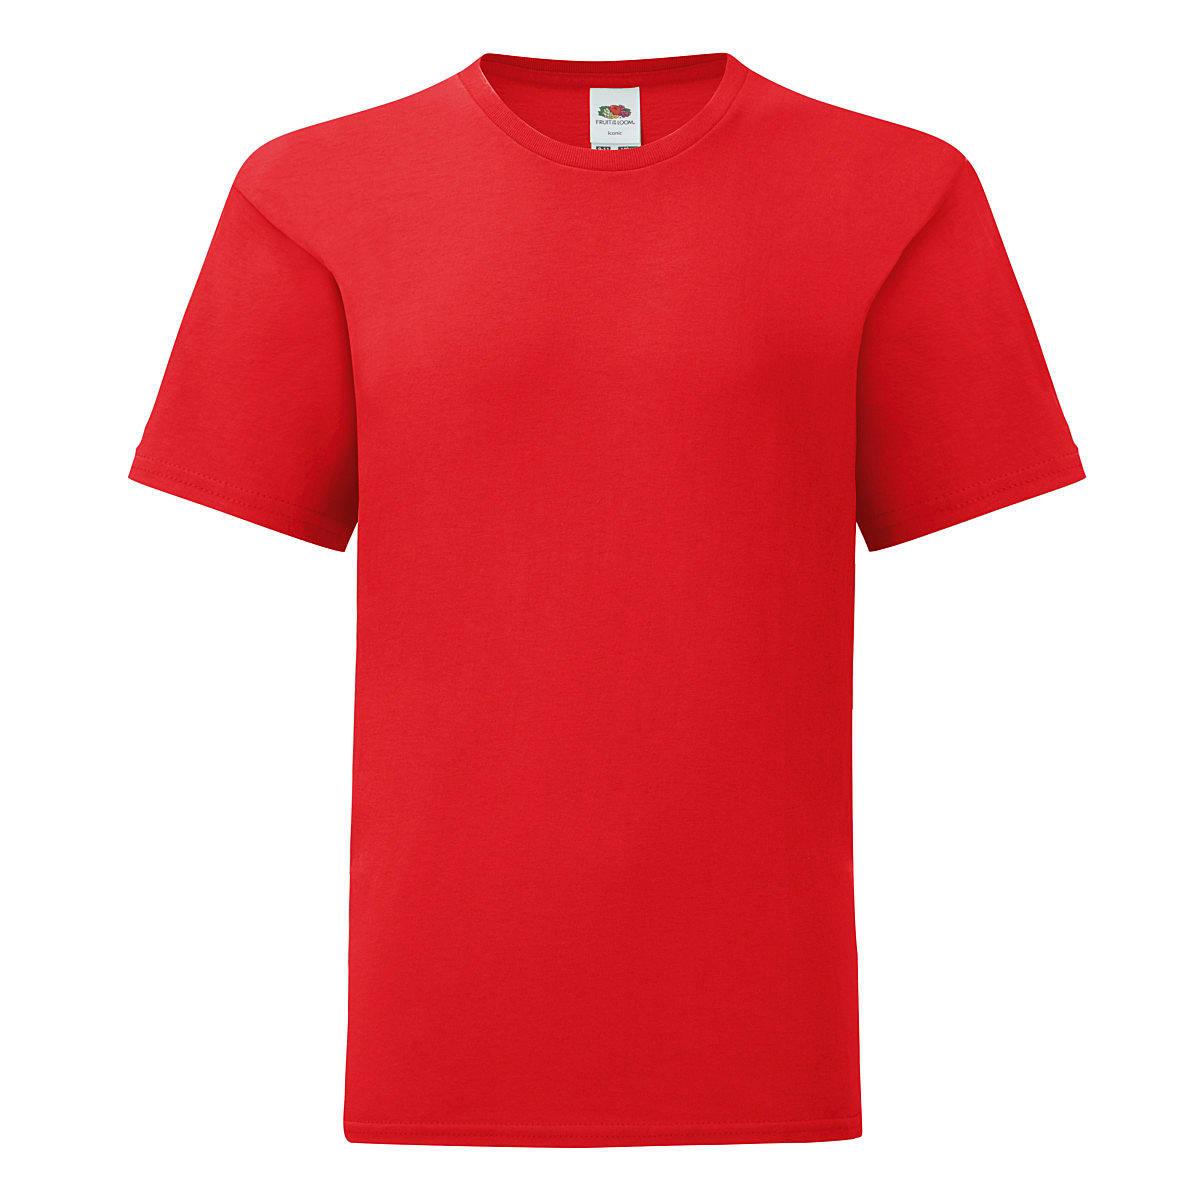 Fruit Of The Loom Kids Iconic T-Shirt in Red (Product Code: 61023)